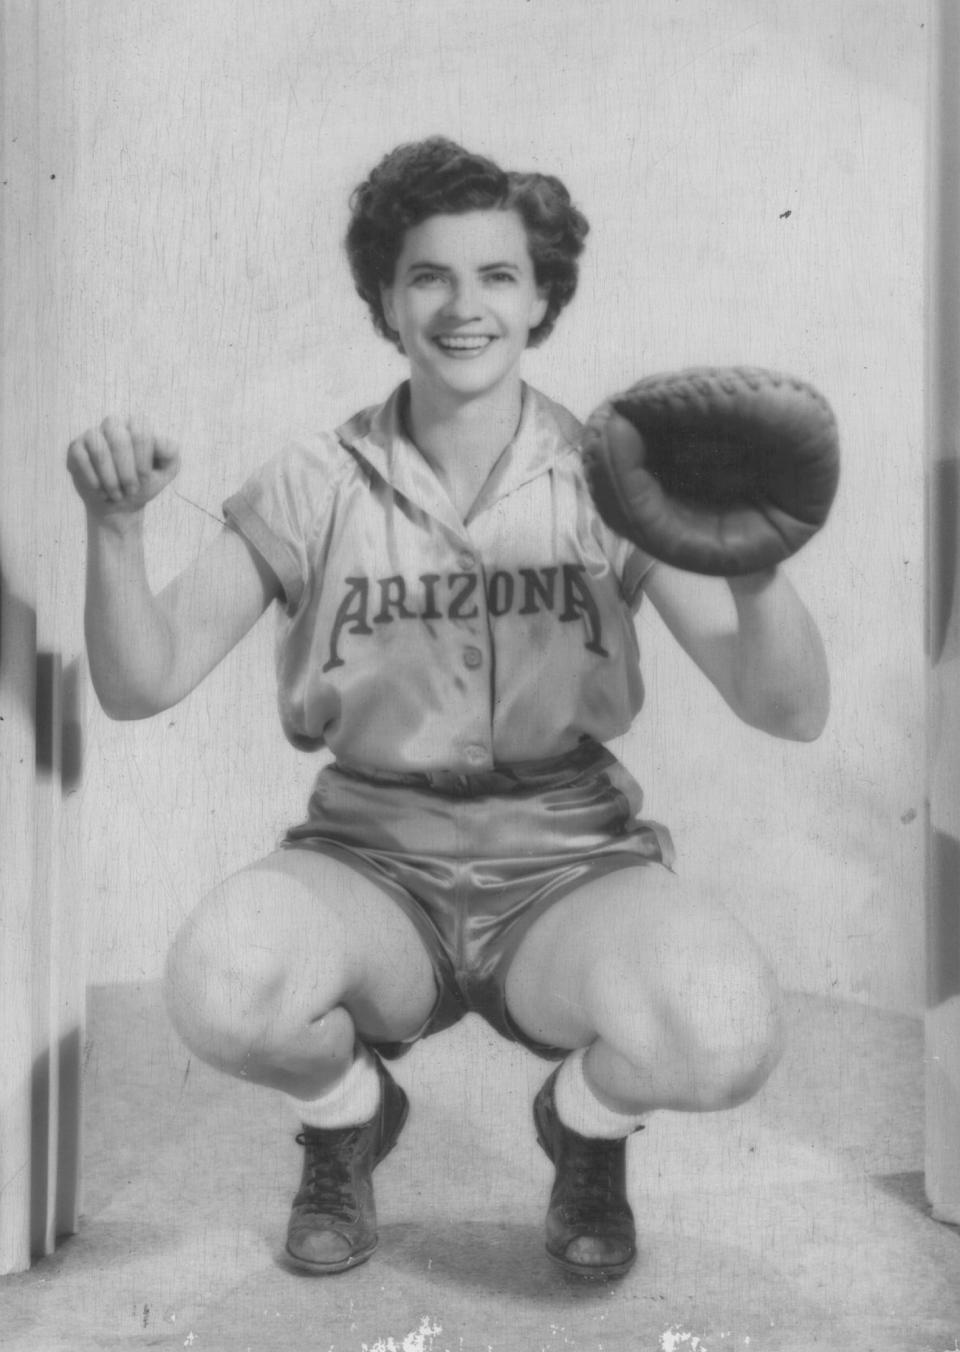 Dot Wilkinson poses in her uniform. She played for the Ramblers from 1933 to 1965.